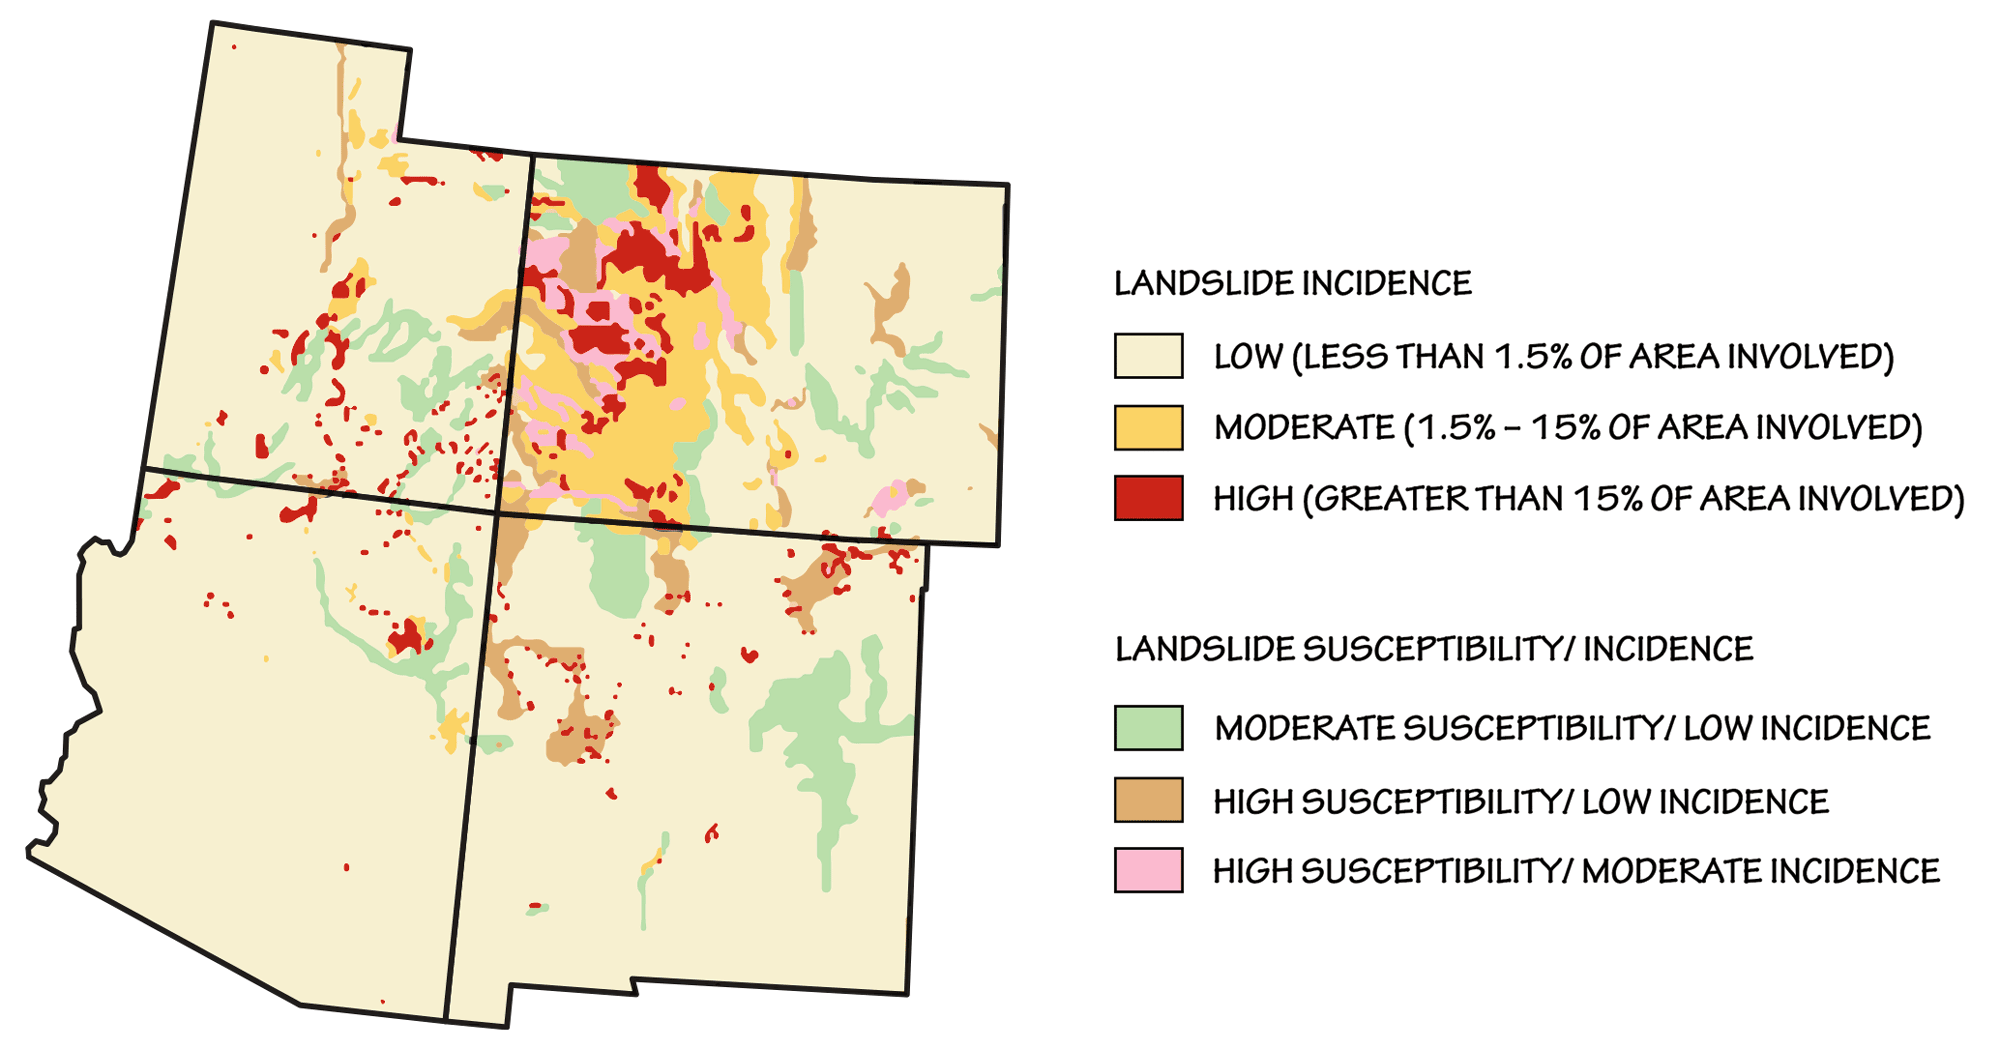 Map showing areas of landslide risk in the southwestern United States.